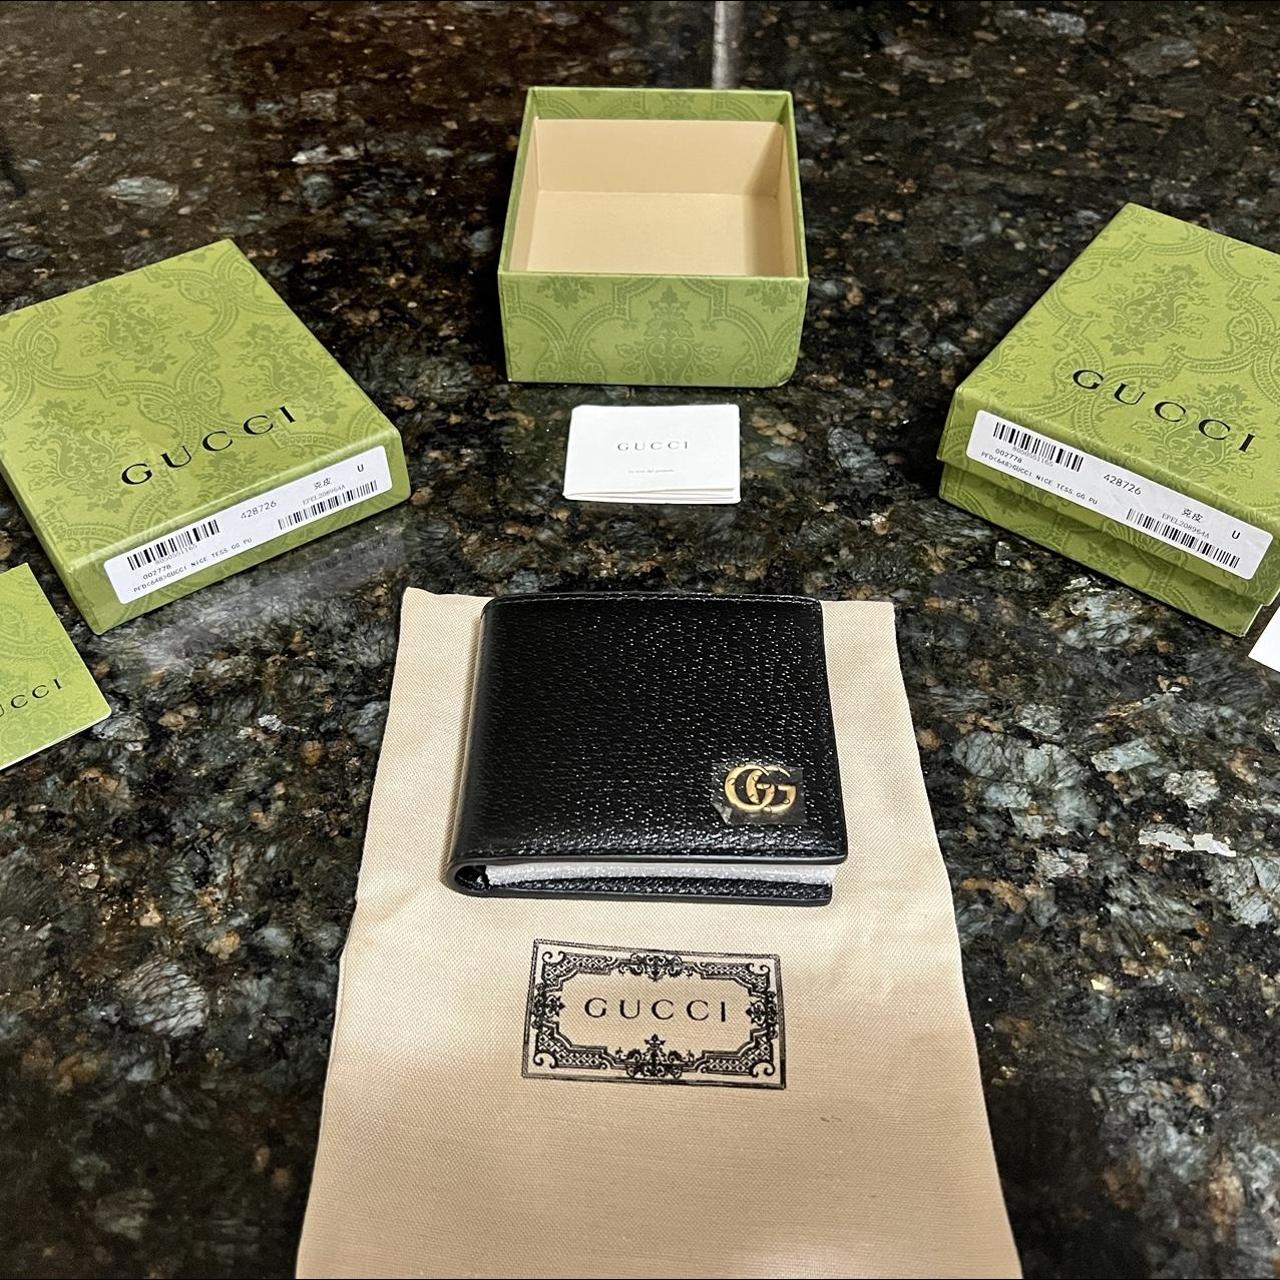 Gucci, Bags, Authentic Brand New Gucci Mens Wallet